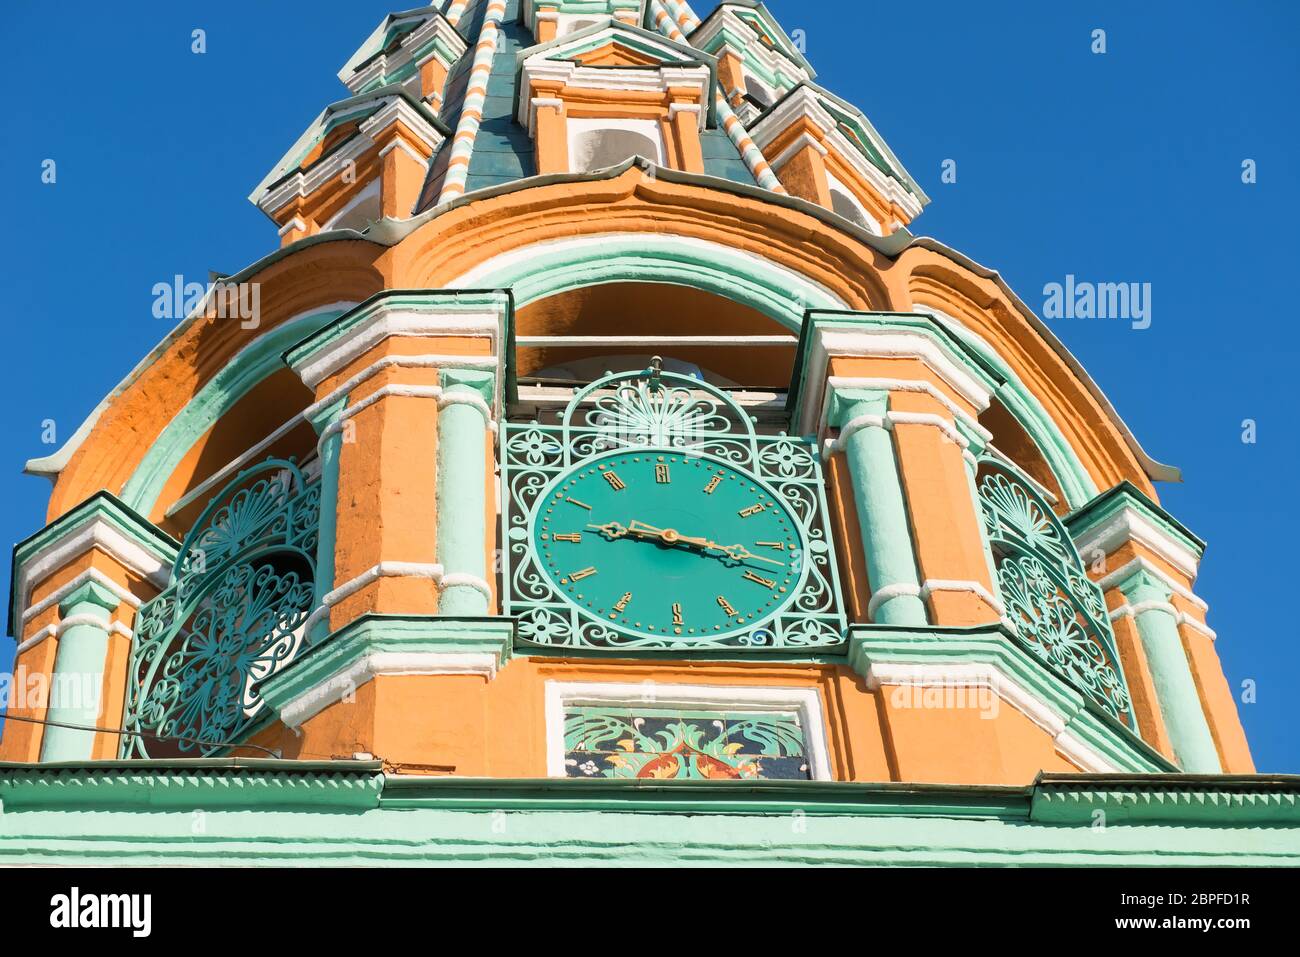 MOSCOW, STREET GREAT POLYANKA 29A, RUSSIA - FEBRUARY 22, 2020: Church of St. Gregory of Neocaesarea  in Darbitz. Bright red green sanctuary in the Stock Photo